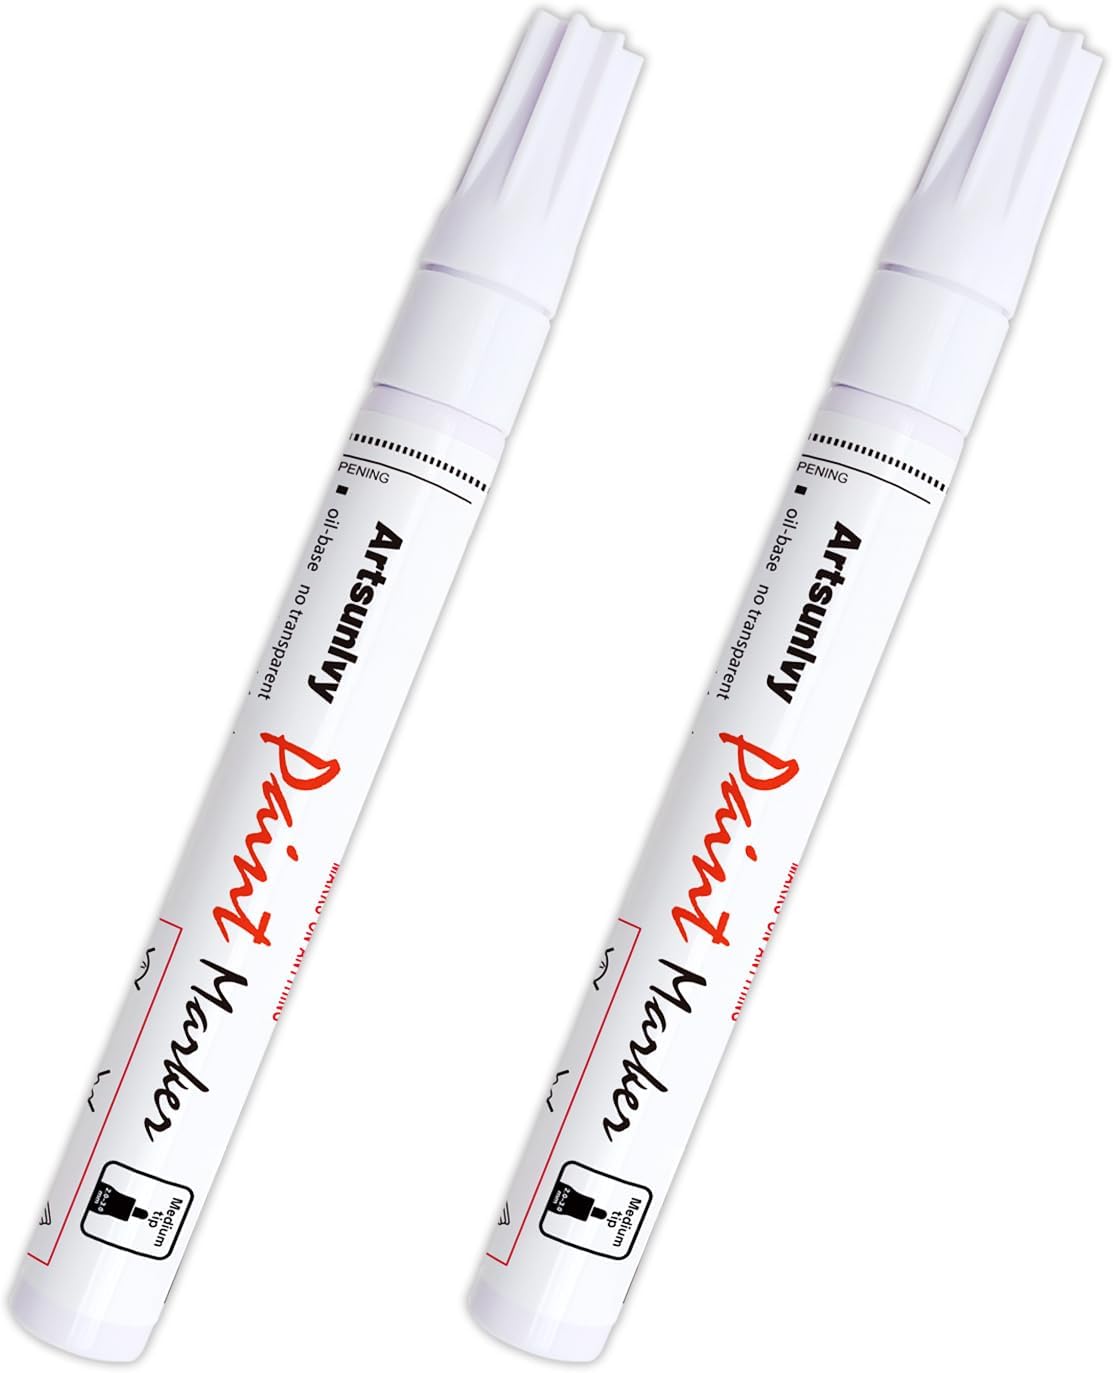 White Paint Pens Permanent Markers - 2 Pack Oil Based [...]